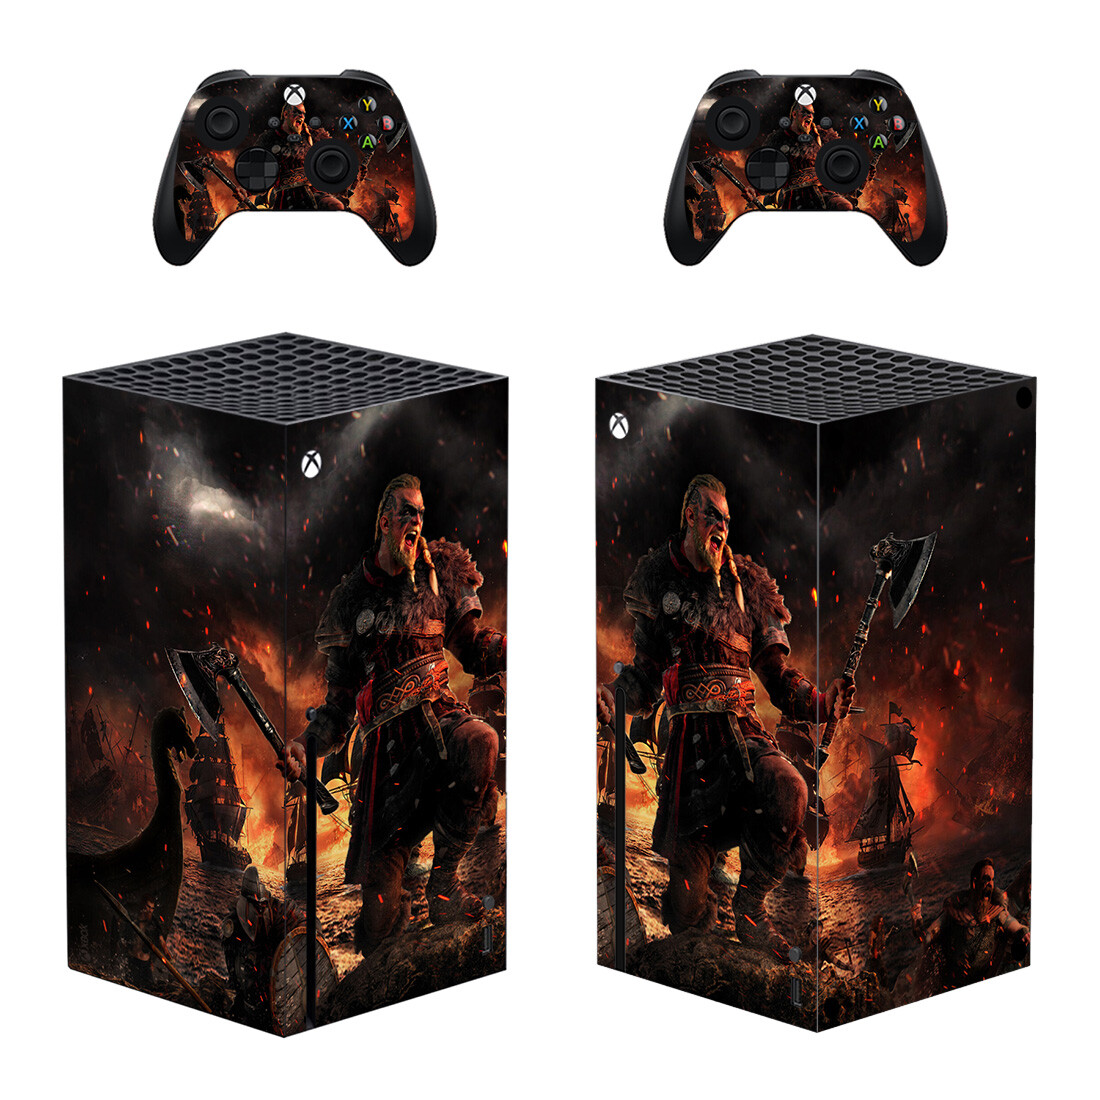 Assassin's Creed Valhalla Skin Sticker For Xbox Series X And Controllers Design 1